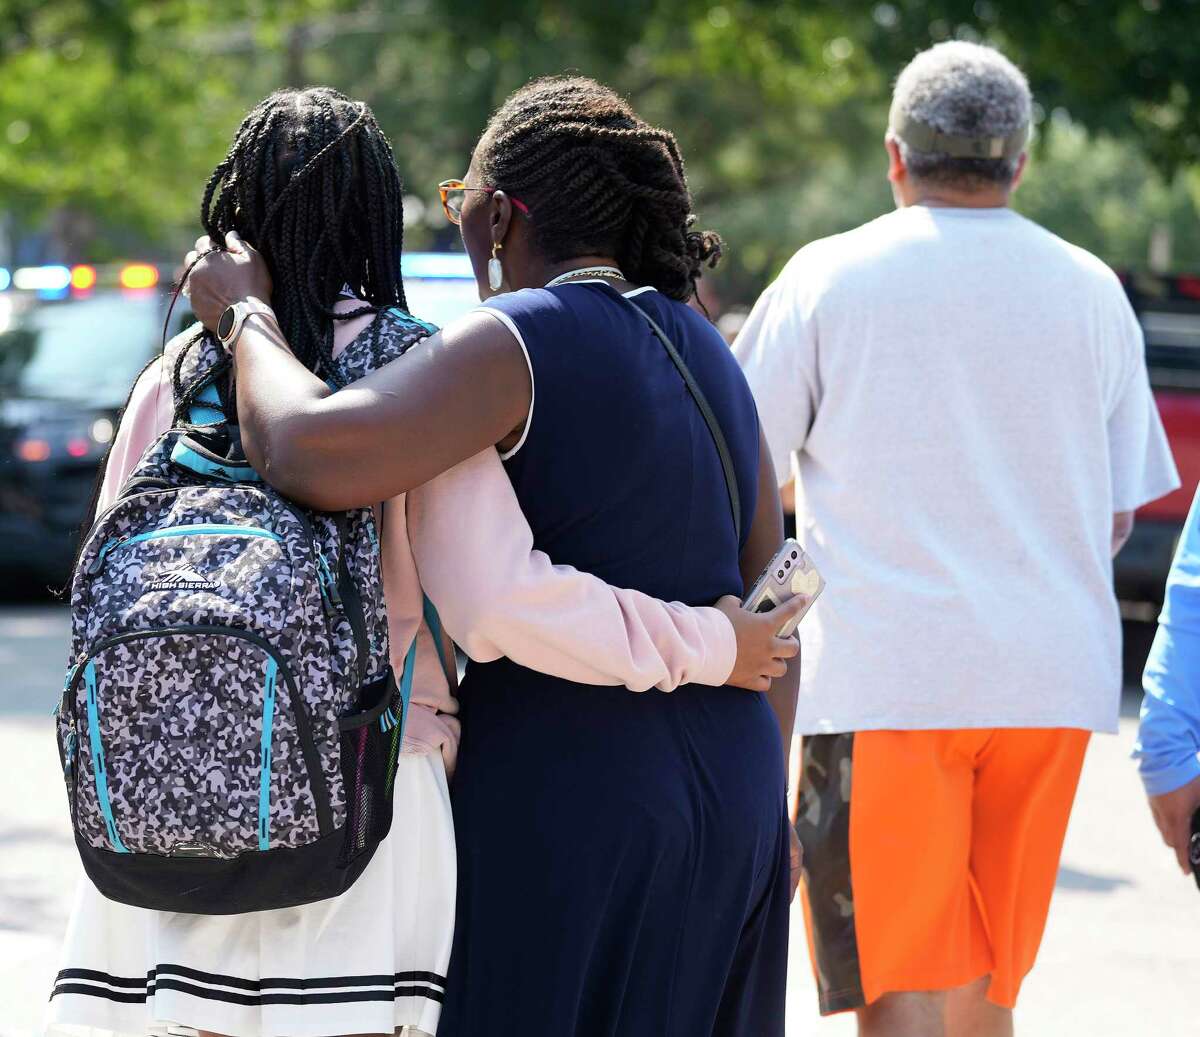 A woman hugs a student as they walked away from Heights High School after they were reunited after a reported active shooter scare at Heights High School on Tuesday, Sept. 13, 2022 in Houston. Active shooter scare forces Heights High School and nearby campuses into lockdown.